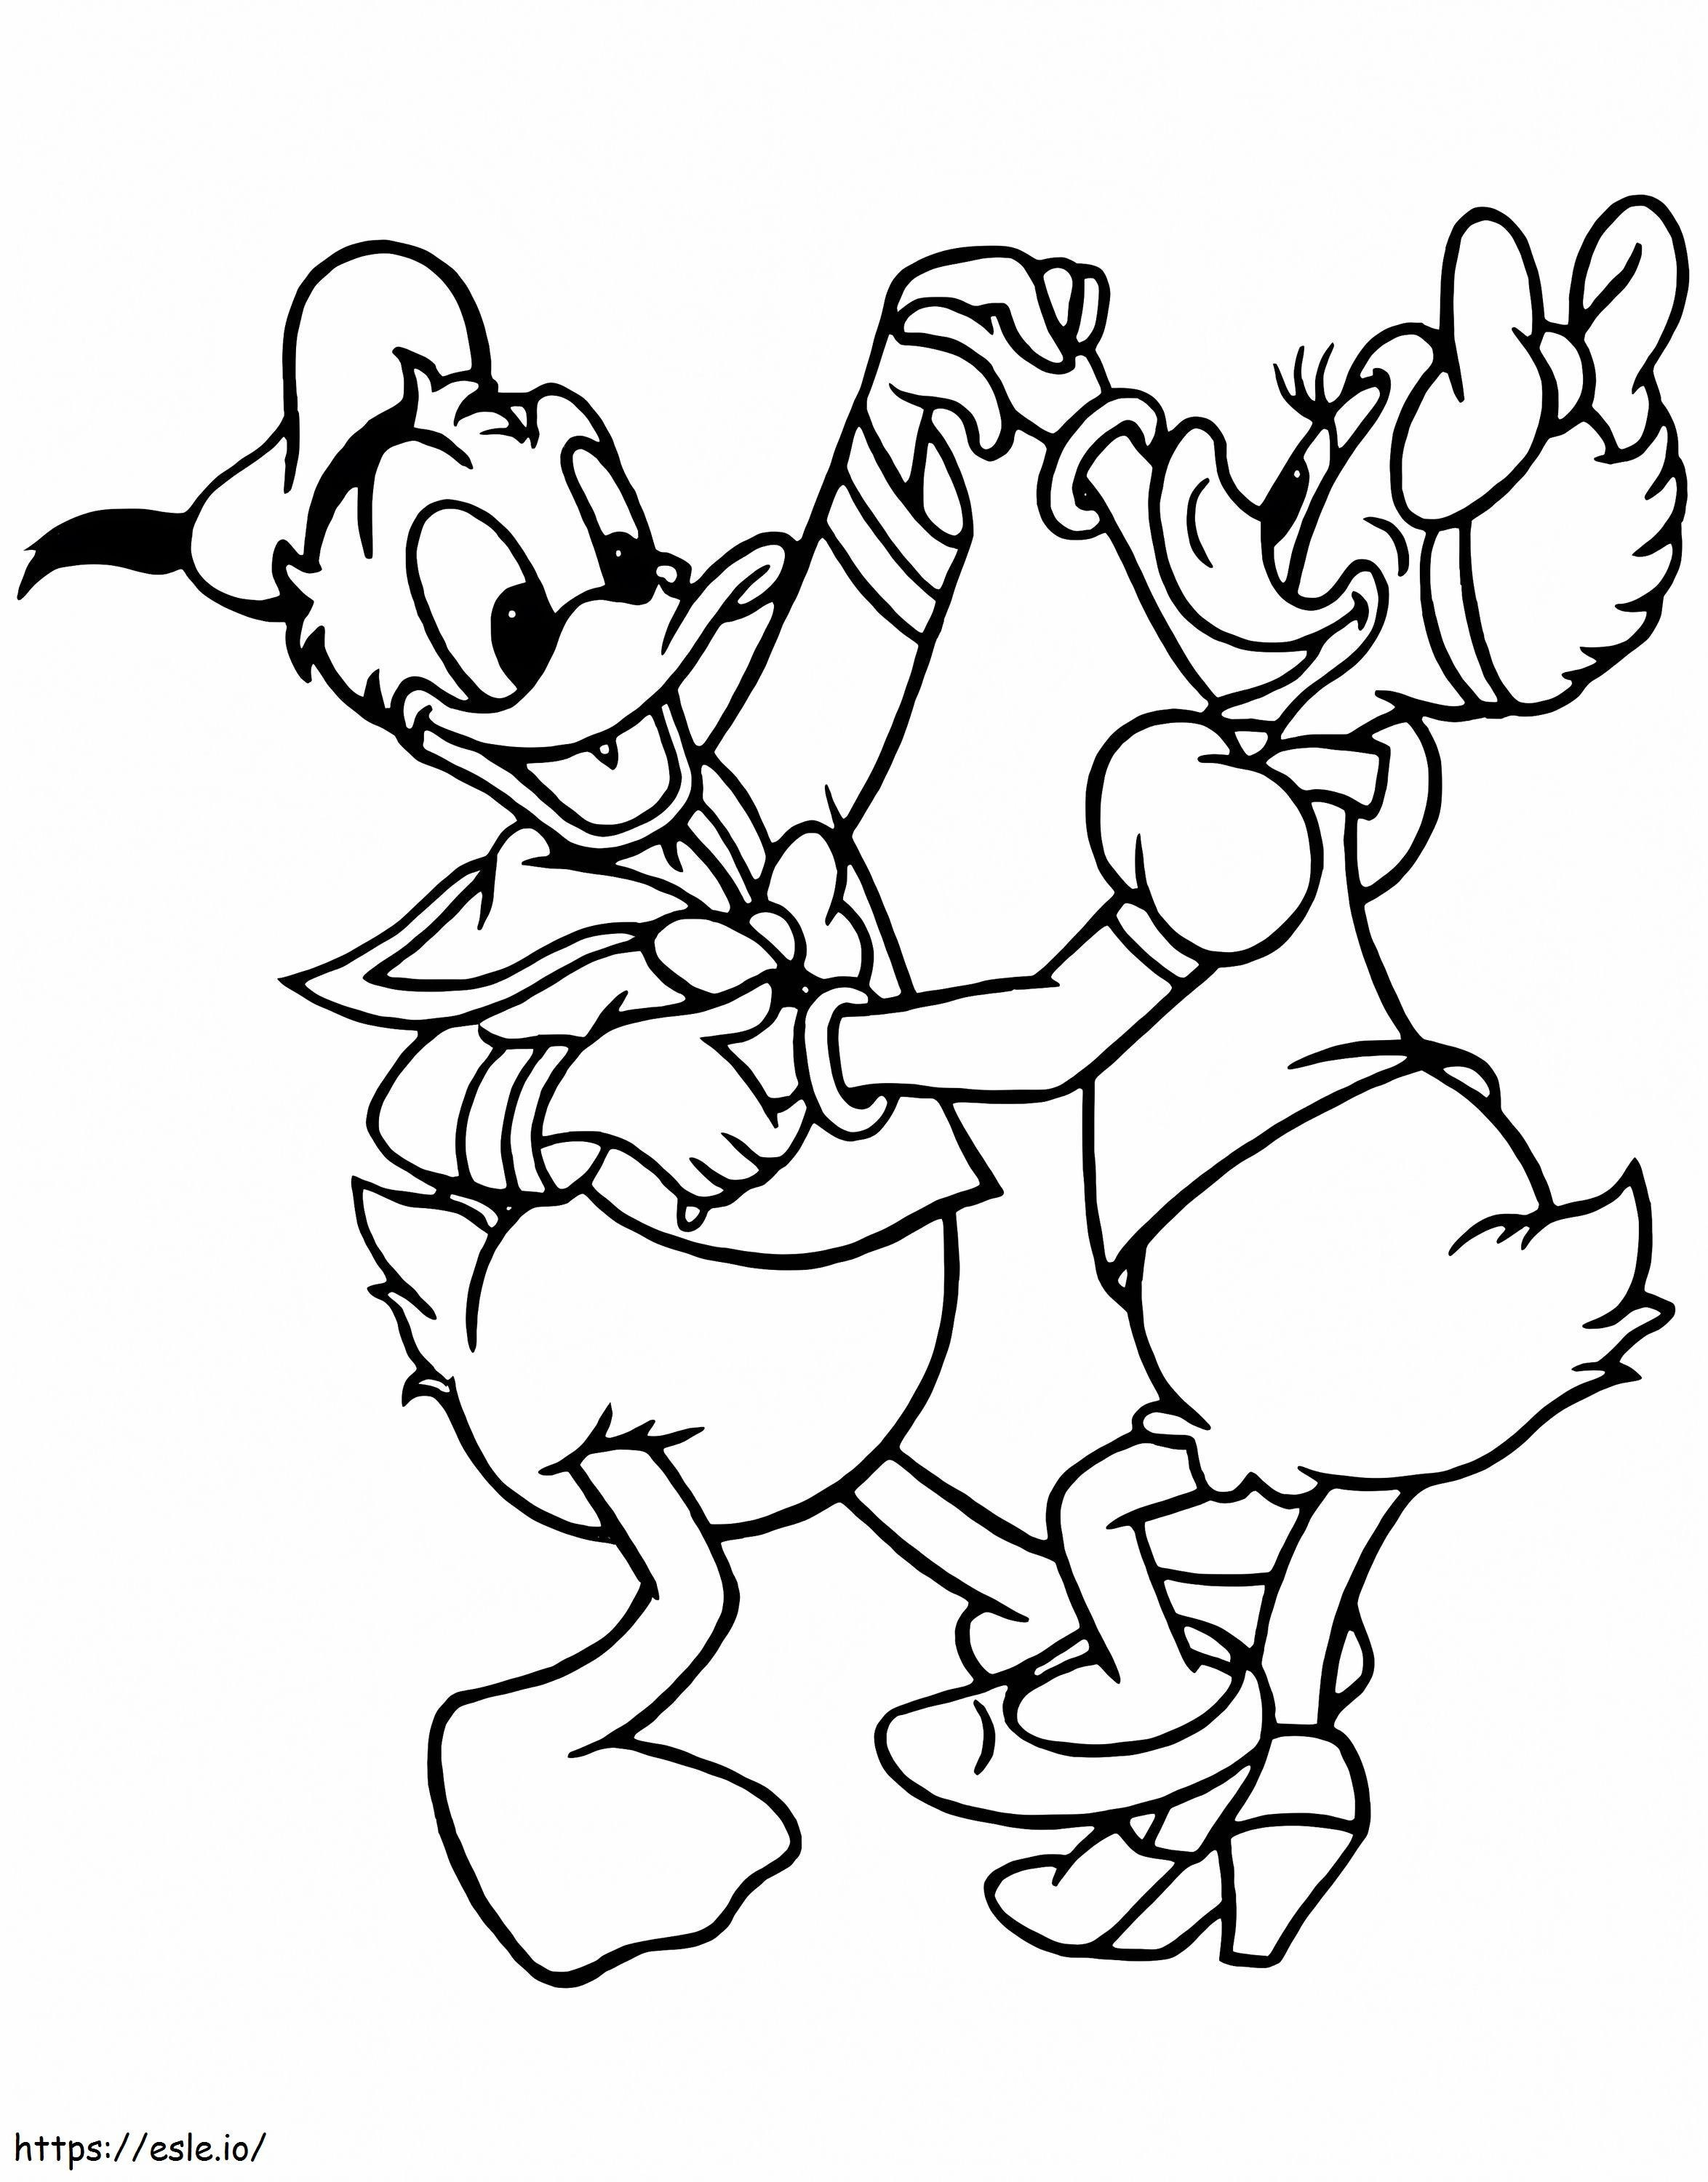 Daisy Duck And Donald Duck Dancing coloring page